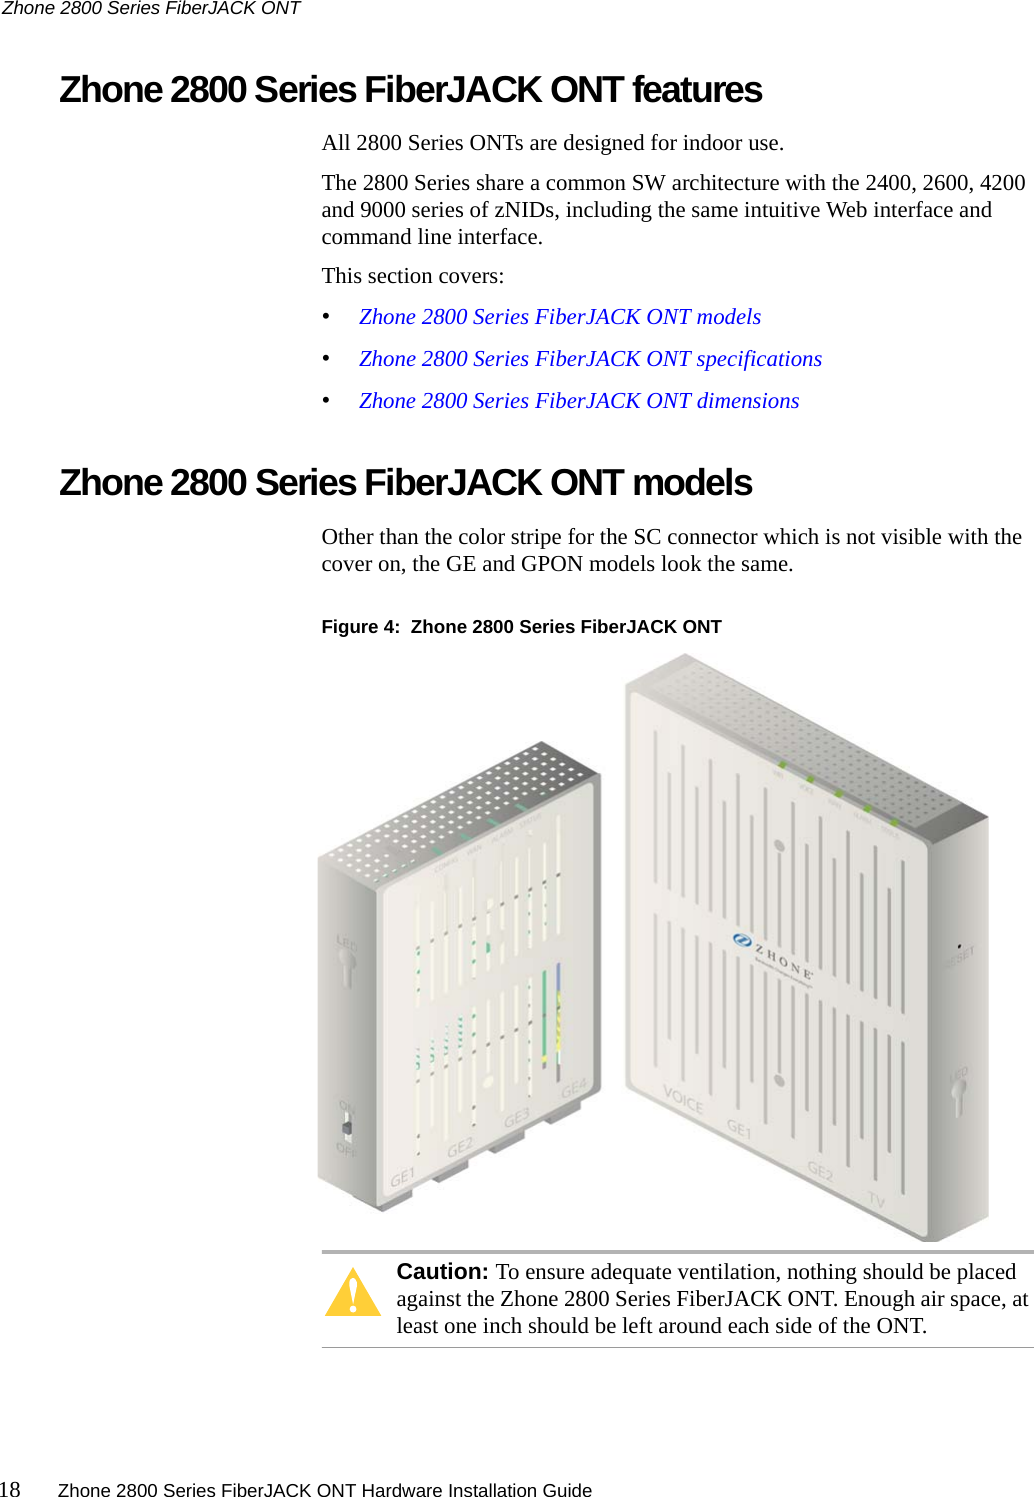 Zhone 2800 Series FiberJACK ONT18 Zhone 2800 Series FiberJACK ONT Hardware Installation Guide   Zhone 2800 Series FiberJACK ONT featuresAll 2800 Series ONTs are designed for indoor use.The 2800 Series share a common SW architecture with the 2400, 2600, 4200 and 9000 series of zNIDs, including the same intuitive Web interface and command line interface.This section covers:•Zhone 2800 Series FiberJACK ONT models•Zhone 2800 Series FiberJACK ONT specifications•Zhone 2800 Series FiberJACK ONT dimensionsZhone 2800 Series FiberJACK ONT modelsOther than the color stripe for the SC connector which is not visible with the cover on, the GE and GPON models look the same.Figure 4:  Zhone 2800 Series FiberJACK ONT Caution: To ensure adequate ventilation, nothing should be placed against the Zhone 2800 Series FiberJACK ONT. Enough air space, at least one inch should be left around each side of the ONT.